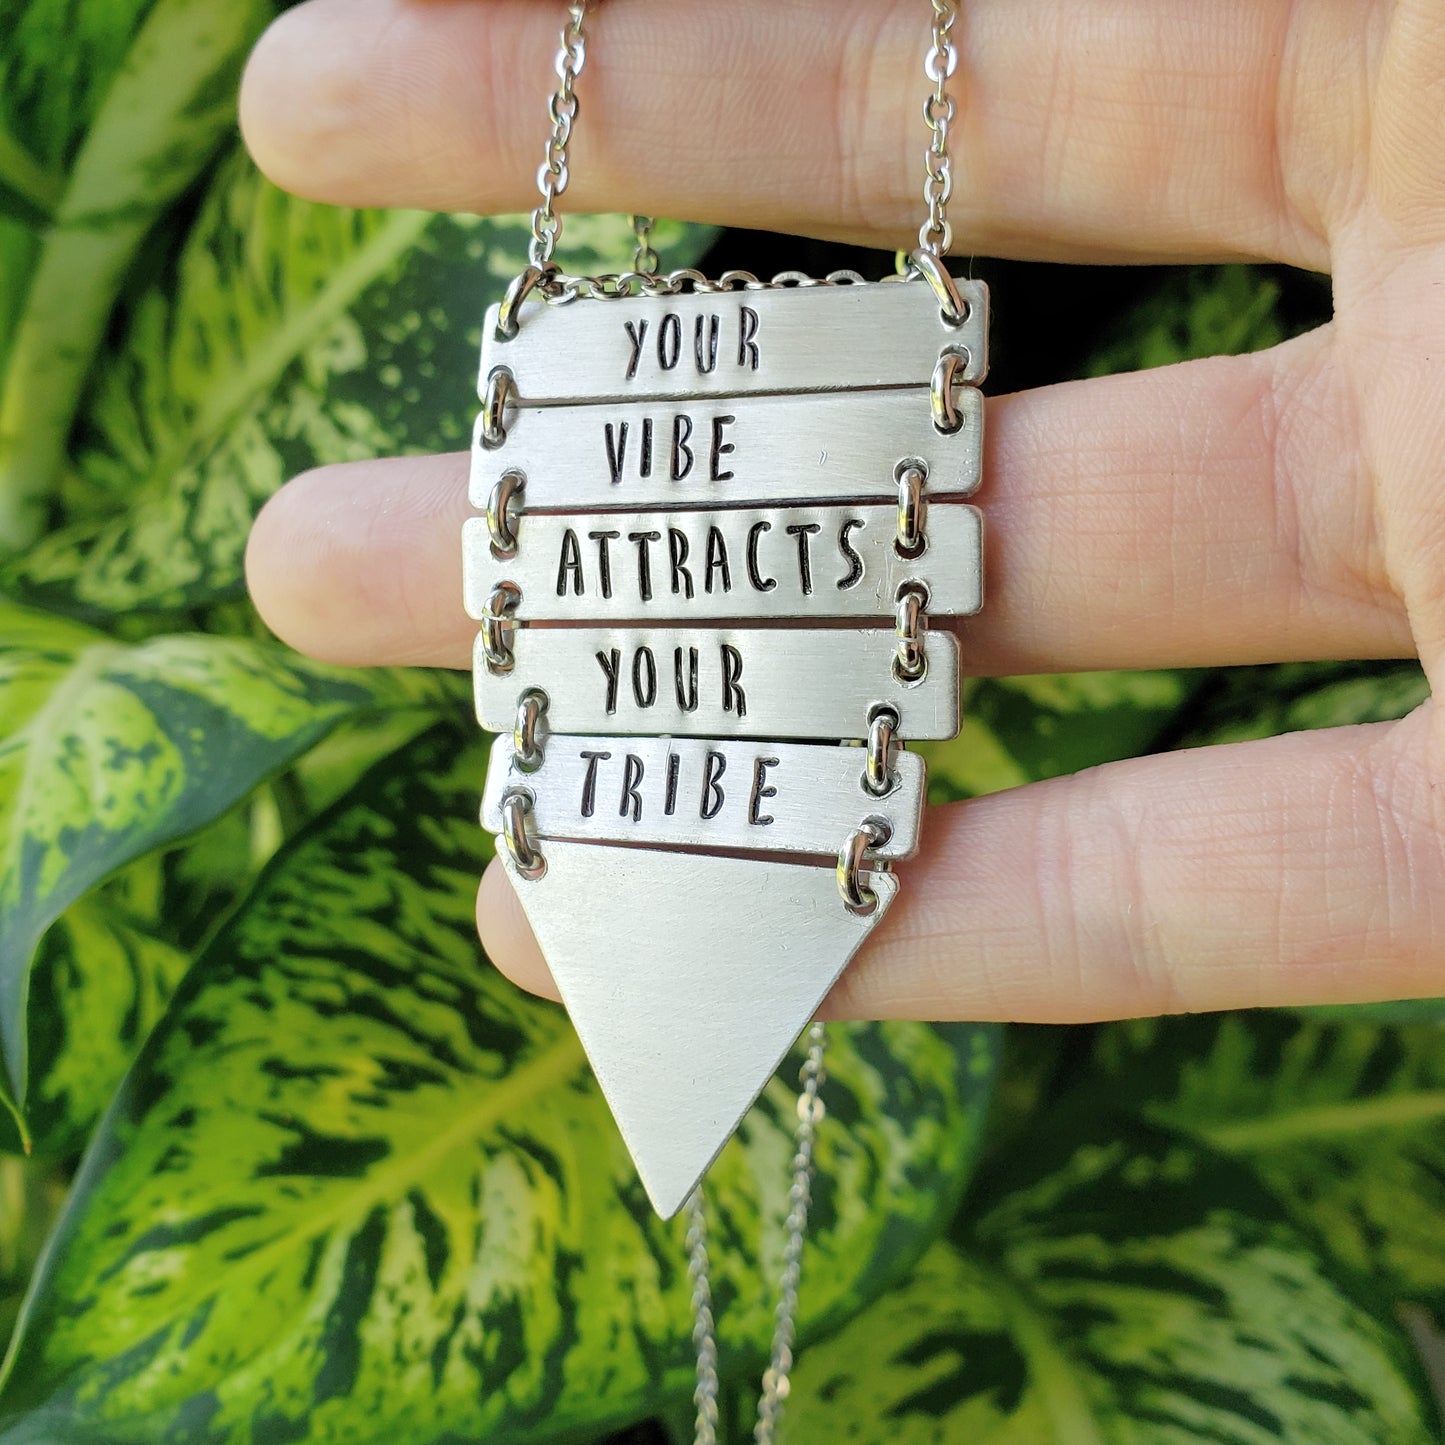 Your vibe attracts your tribe Cascade necklace